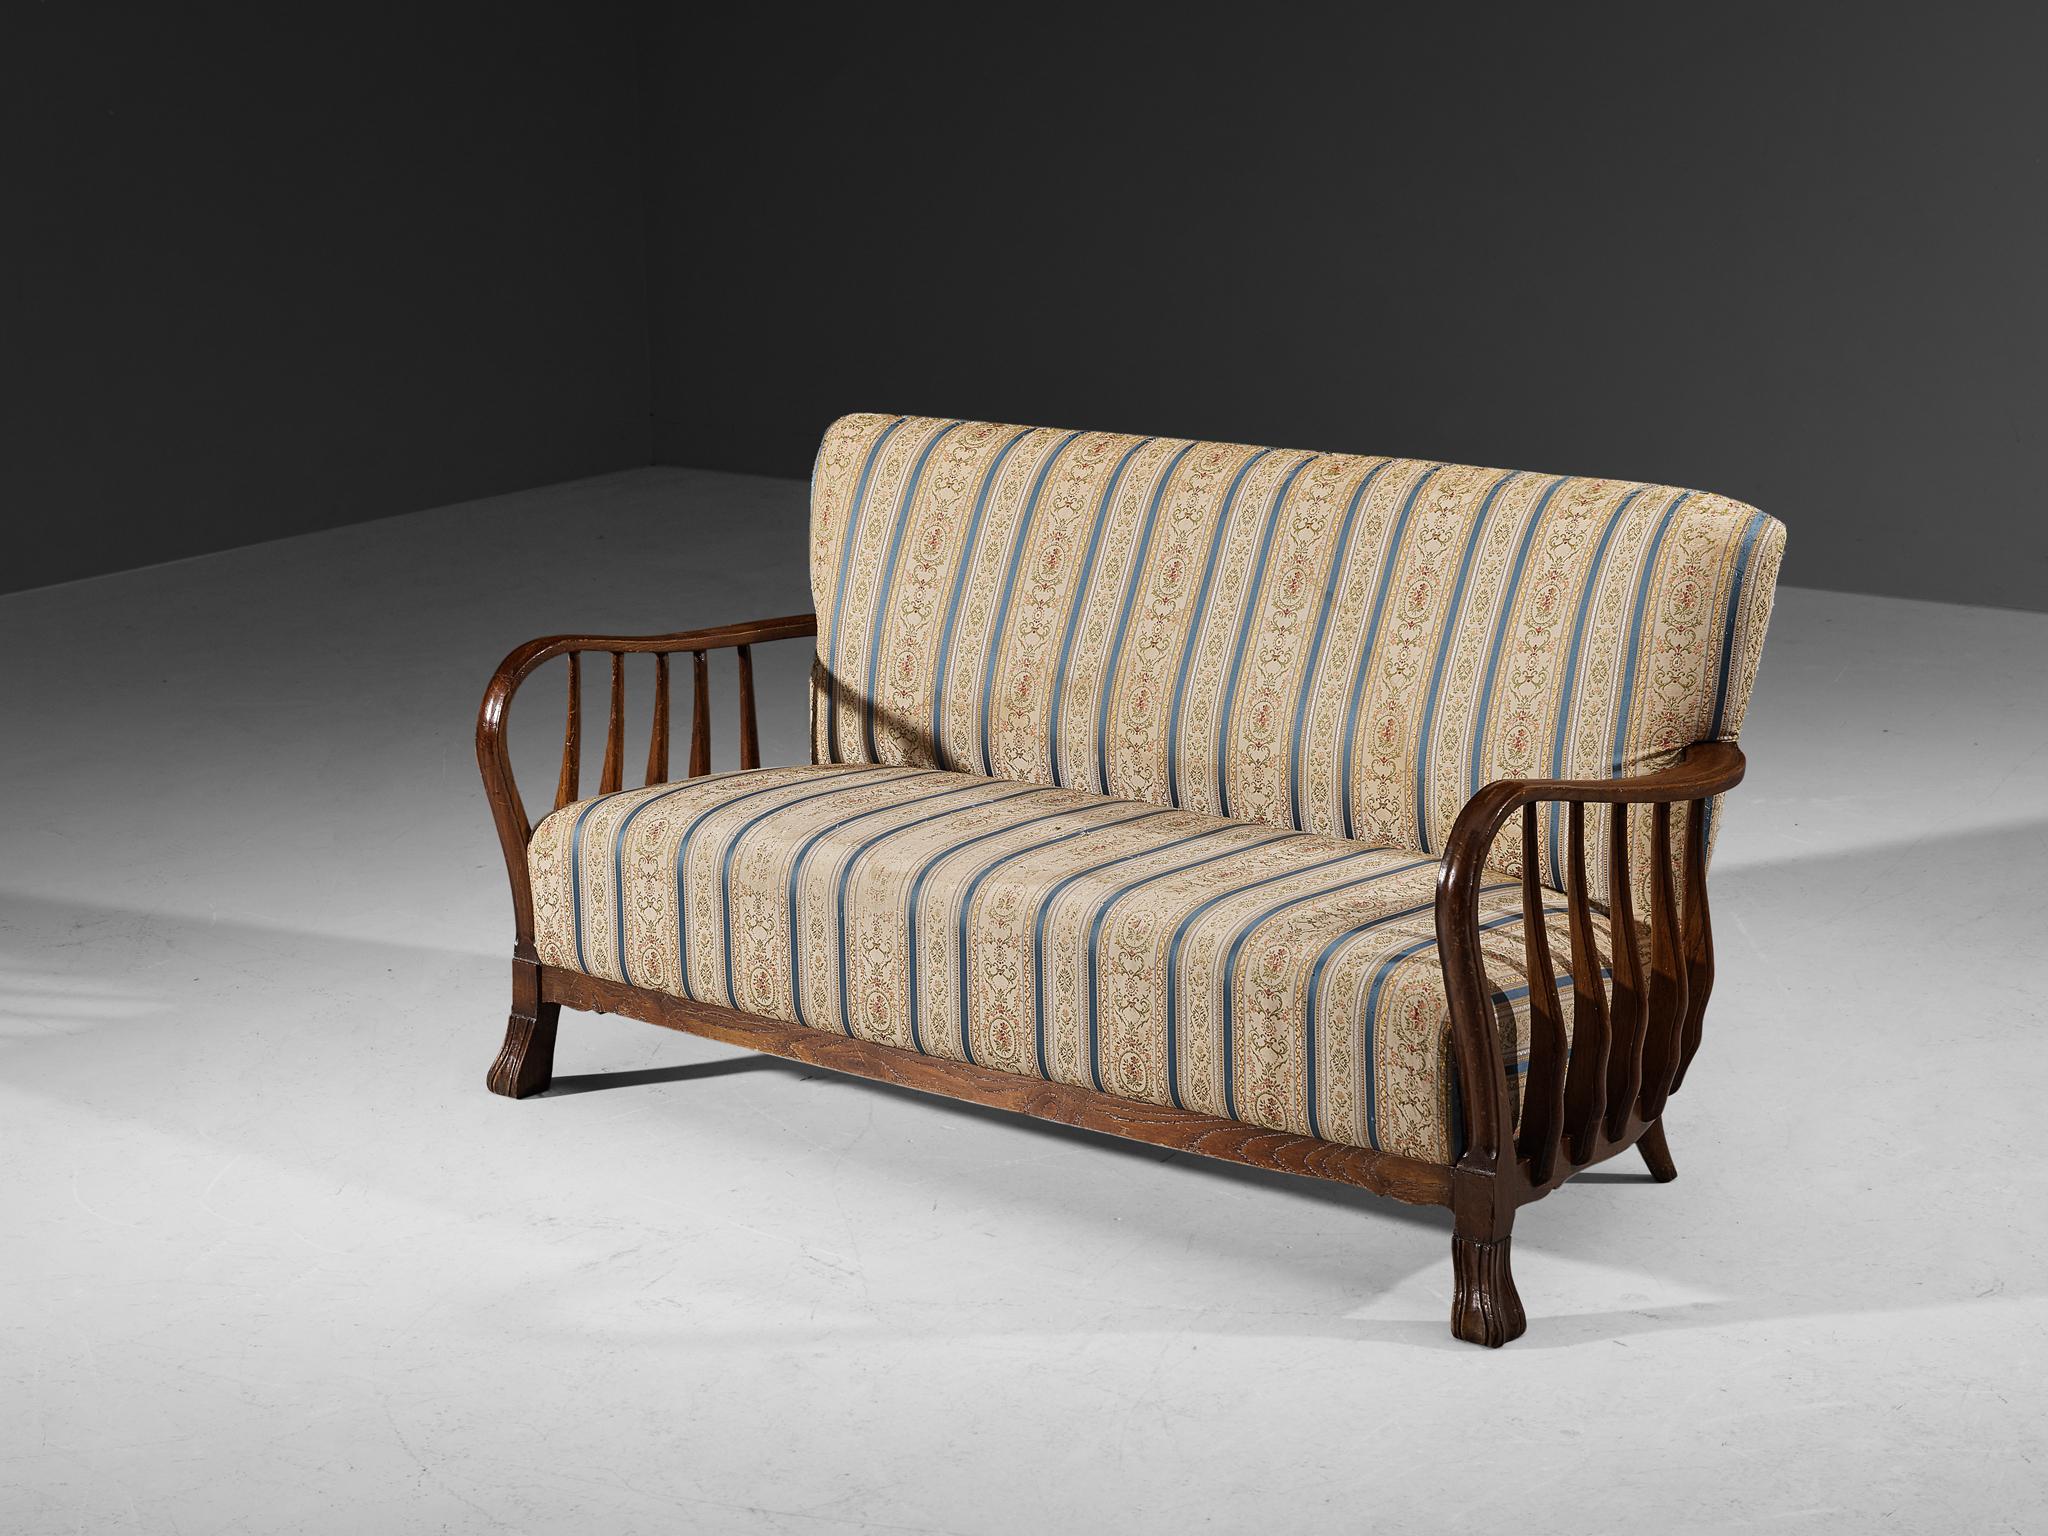 Vittorio Valabrega, two seat sofa, maple, fabric, Italy, 1920s.

Elegant and beautiful two seat sofa with a maple frame, and a vertical striped fabric in green and beige motive. This settee is designed by the Italian Vittorio Valabrega in the